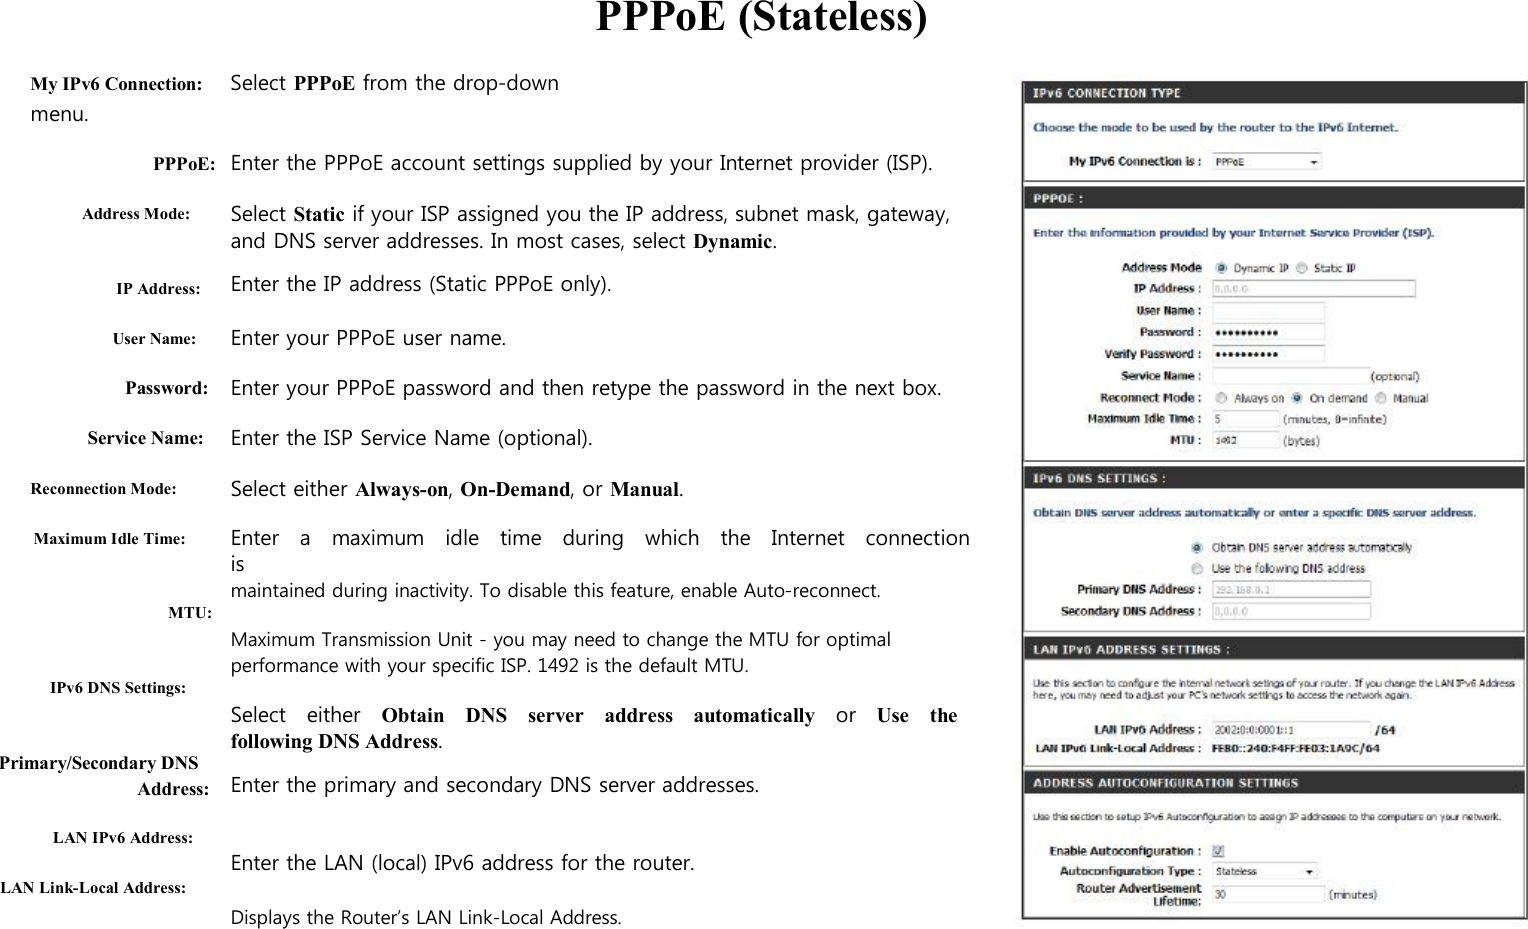      My IPv6 Connection: Select PPPoE from the drop-down menu.   PPPoE (Stateless)  PPPoE:  Address Mode:   IP Address:  User Name:  Password:  Service Name:  Reconnection Mode:  Maximum Idle Time:   MTU:   IPv6 DNS Settings:   Primary/Secondary DNS Address:  LAN IPv6 Address:  LAN Link-Local Address:  Enter the PPPoE account settings supplied by your Internet provider (ISP).  Select Static if your ISP assigned you the IP address, subnet mask, gateway,   and DNS server addresses. In most cases, select Dynamic. Enter the IP address (Static PPPoE only).  Enter your PPPoE user name.  Enter your PPPoE password and then retype the password in the next box.  Enter the ISP Service Name (optional).  Select either Always-on, On-Demand, or Manual.  Enter    a    maximum    idle    time    during    which   the    Internet    connection   is maintained during inactivity. To disable this feature, enable Auto-reconnect.  Maximum Transmission Unit - you may need to change the MTU for optimal performance with your specific ISP. 1492 is the default MTU.  Select    either    Obtain    DNS    server    address    automatically    or    Use    the following DNS Address. Enter the primary and secondary DNS server addresses.   Enter the LAN (local) IPv6 address for the router.  Displays the Router’s LAN Link-Local Address.                     